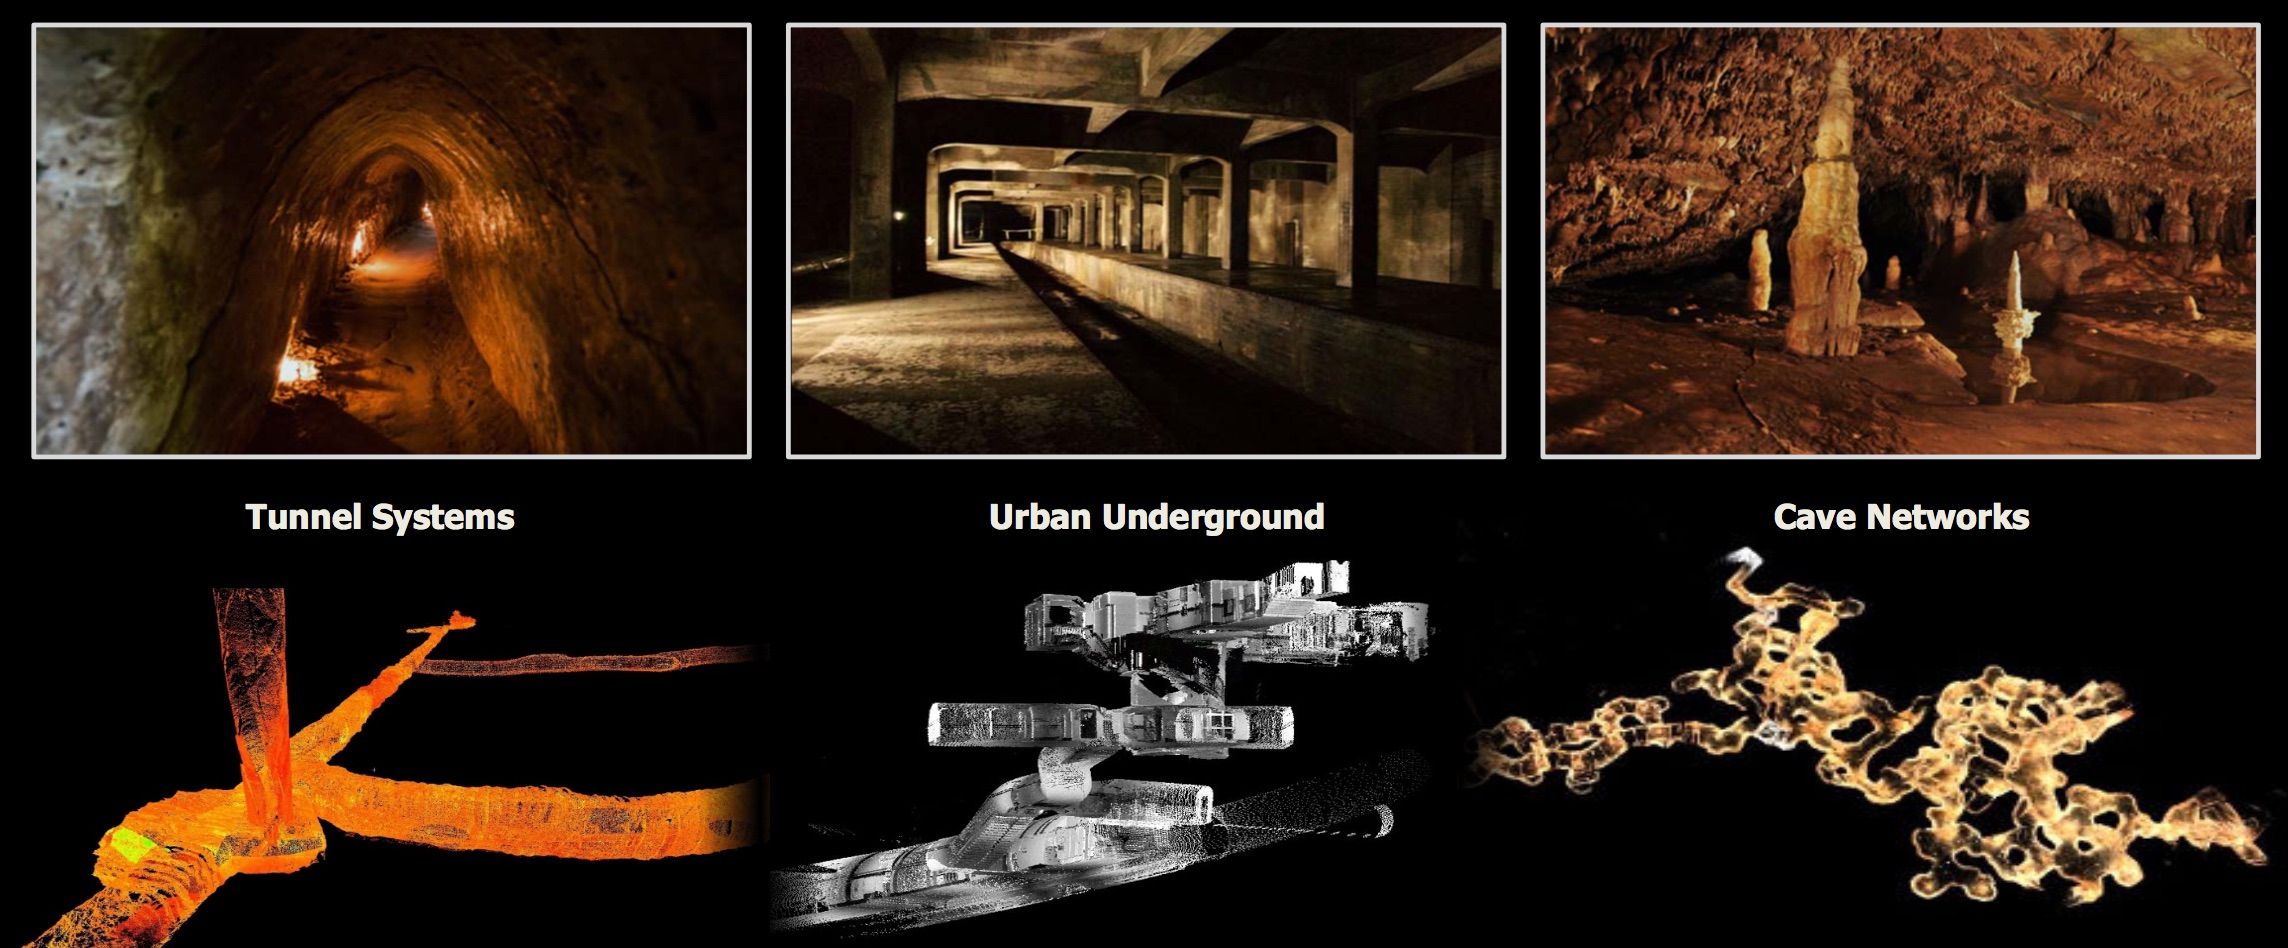 DARPA SubT: Current technologies fail to provide rapid and actionable situational awareness of the diverse subterranean operating environment